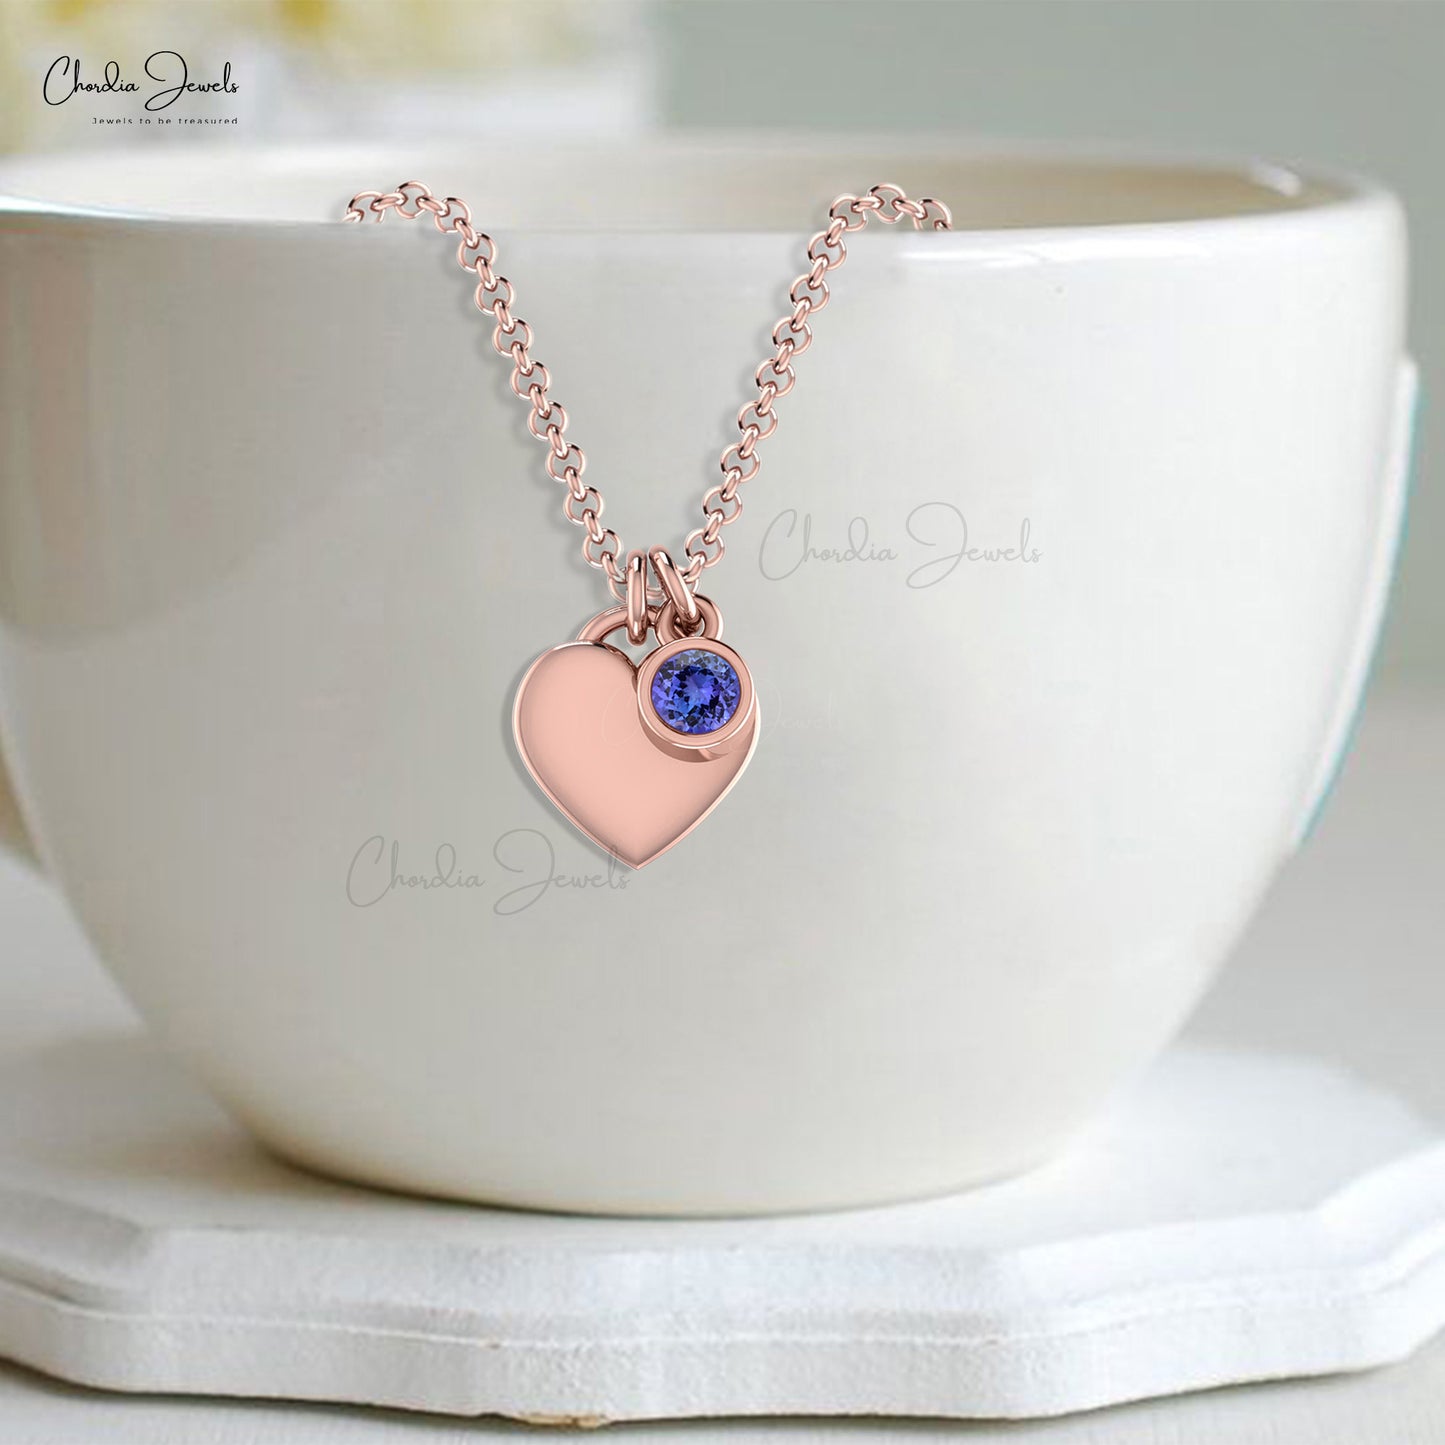 AAA Quality 3mm Round Cut Genuine Tanzanite Heart Shape Necklace 14k Solid Gold December Birthstone Gemstone Jewelry For Anniversary Gift